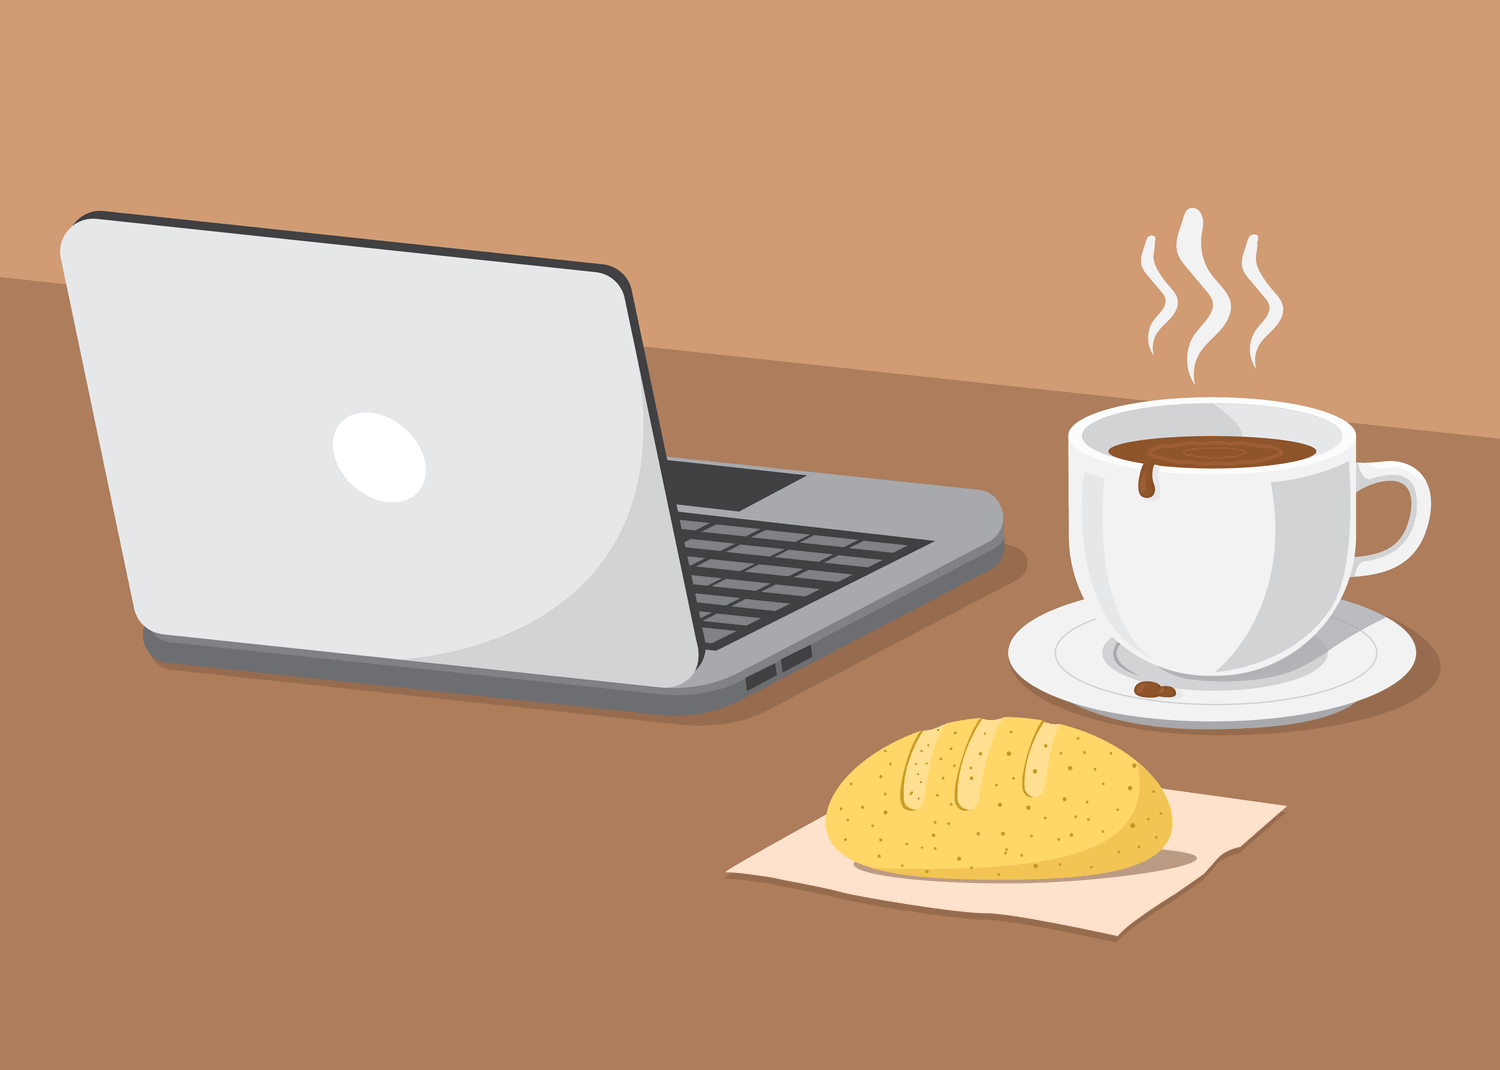 A computer coffee and bread